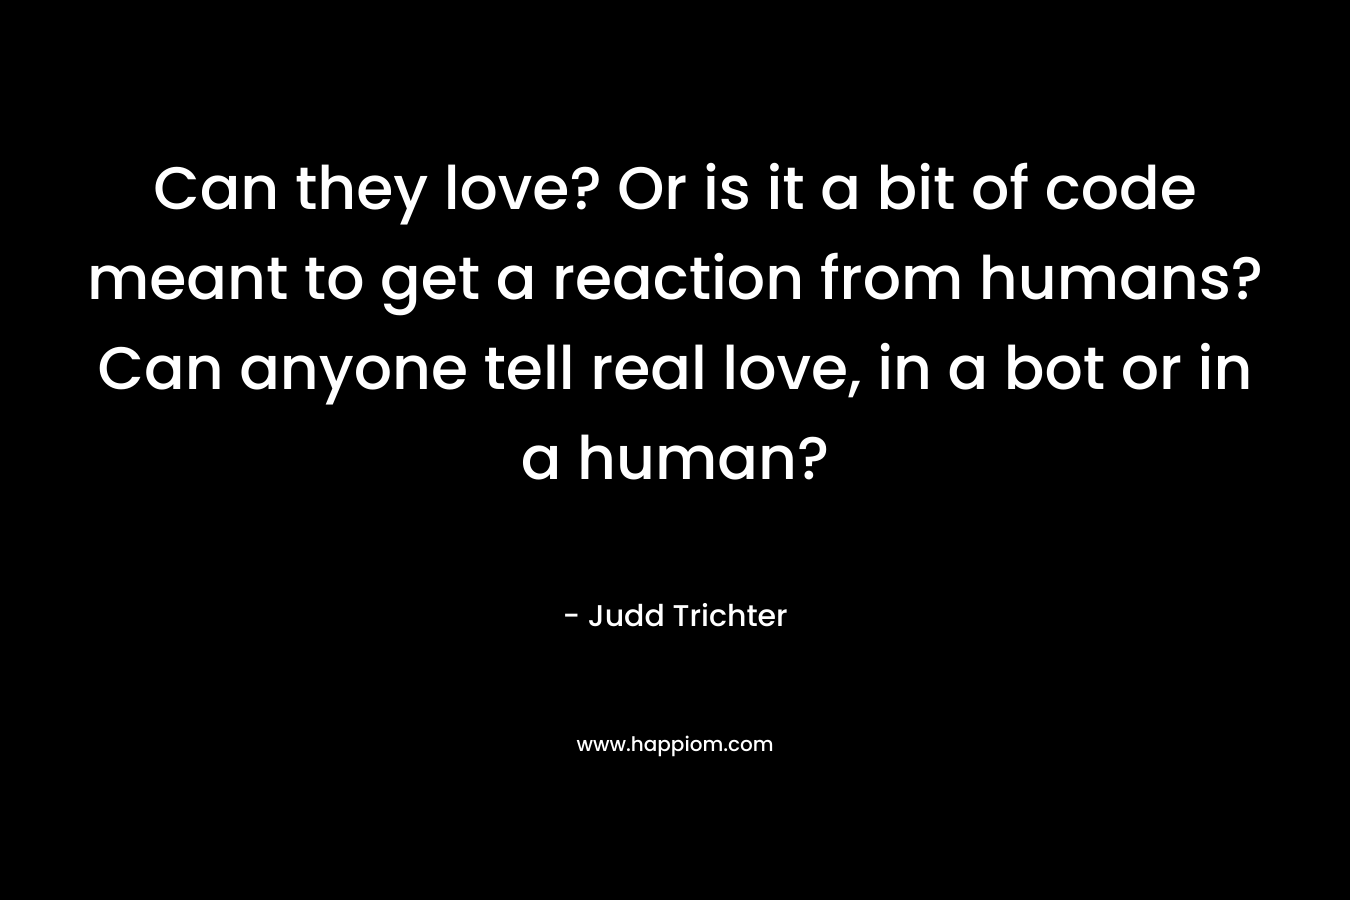 Can they love? Or is it a bit of code meant to get a reaction from humans? Can anyone tell real love, in a bot or in a human? – Judd Trichter